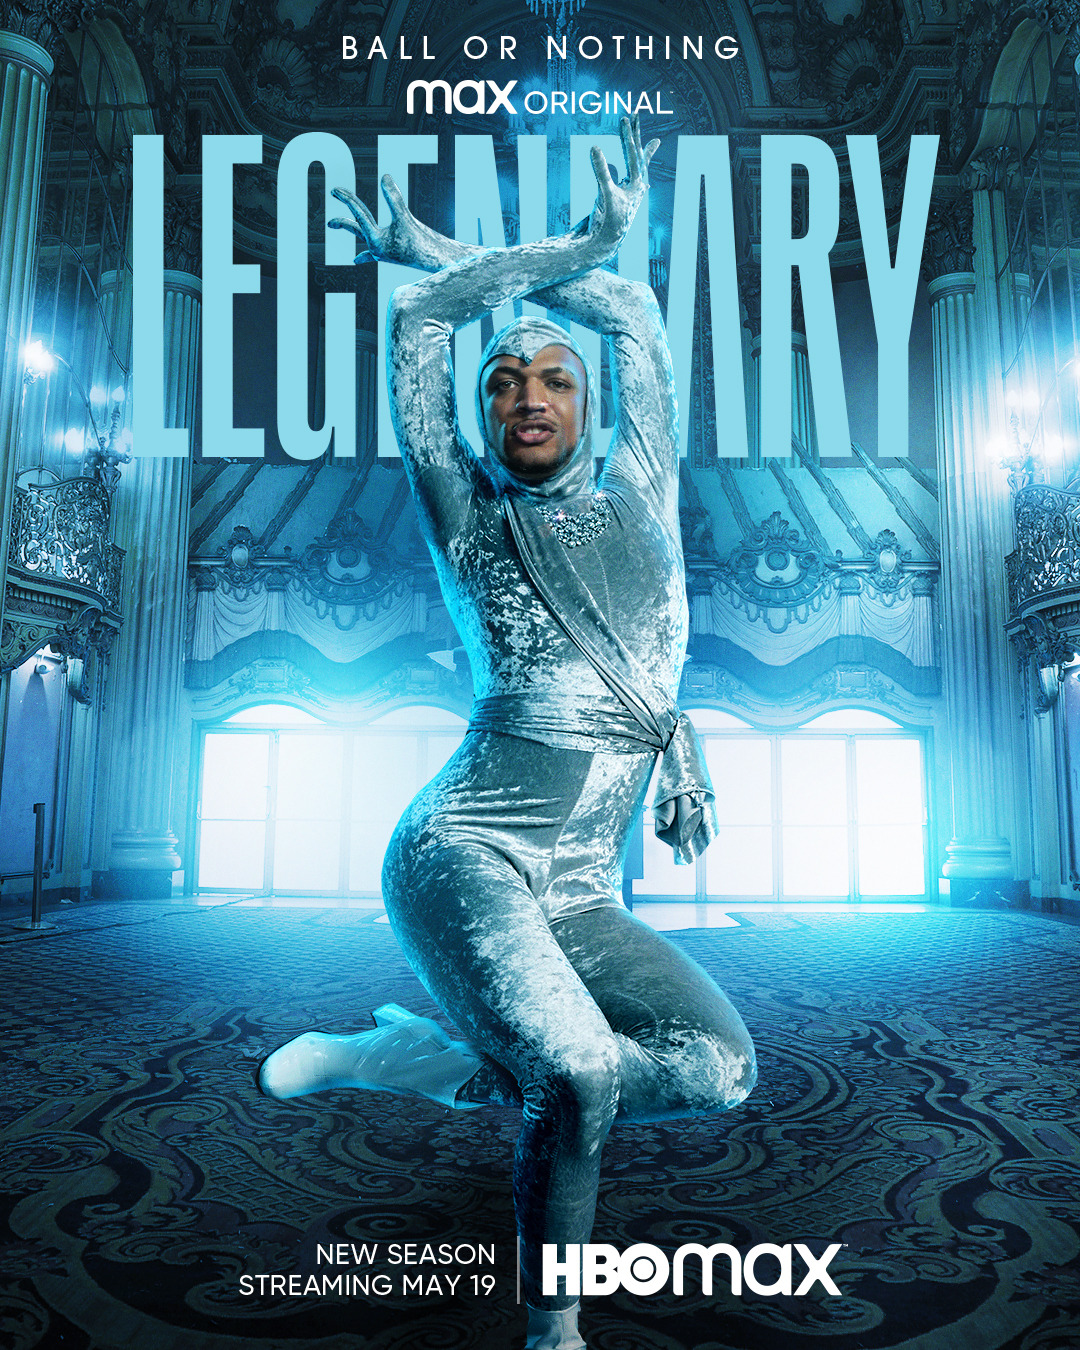 Extra Large TV Poster Image for Legendary (#155 of 173)